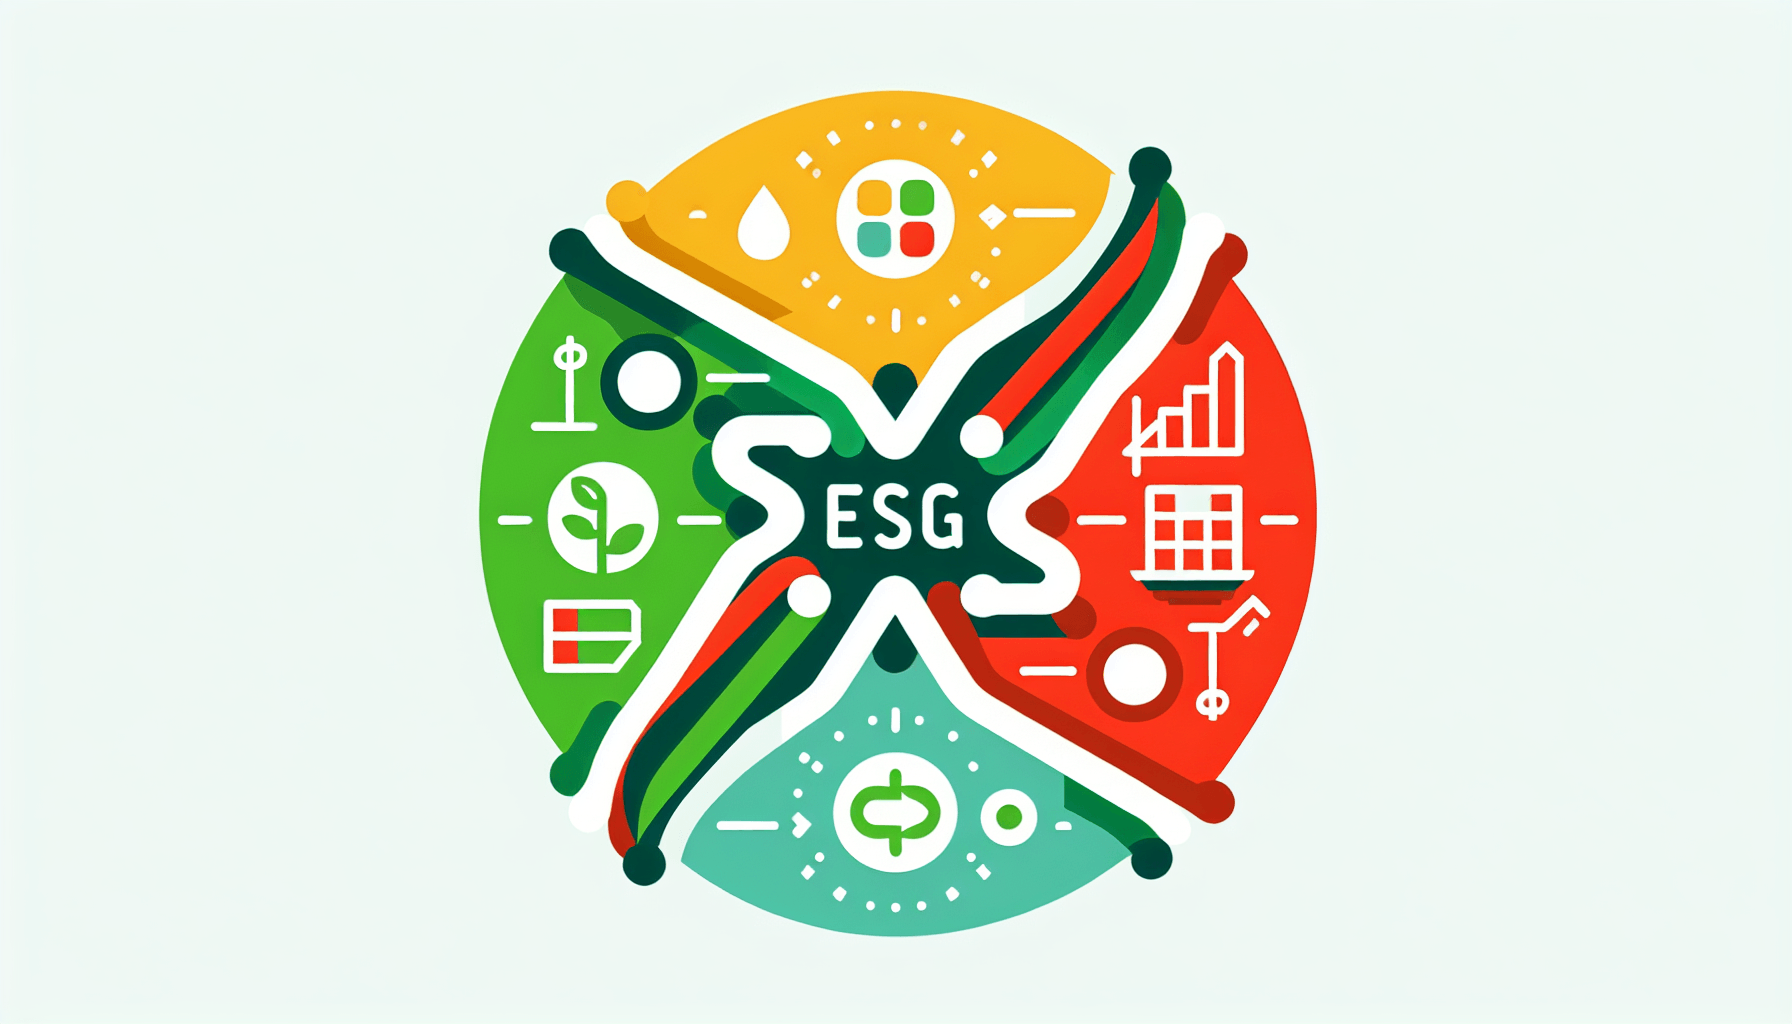 ESG in flat illustration style and white background, red #f47574, green #88c7a8, yellow #fcc44b, and blue #645bc8 colors.